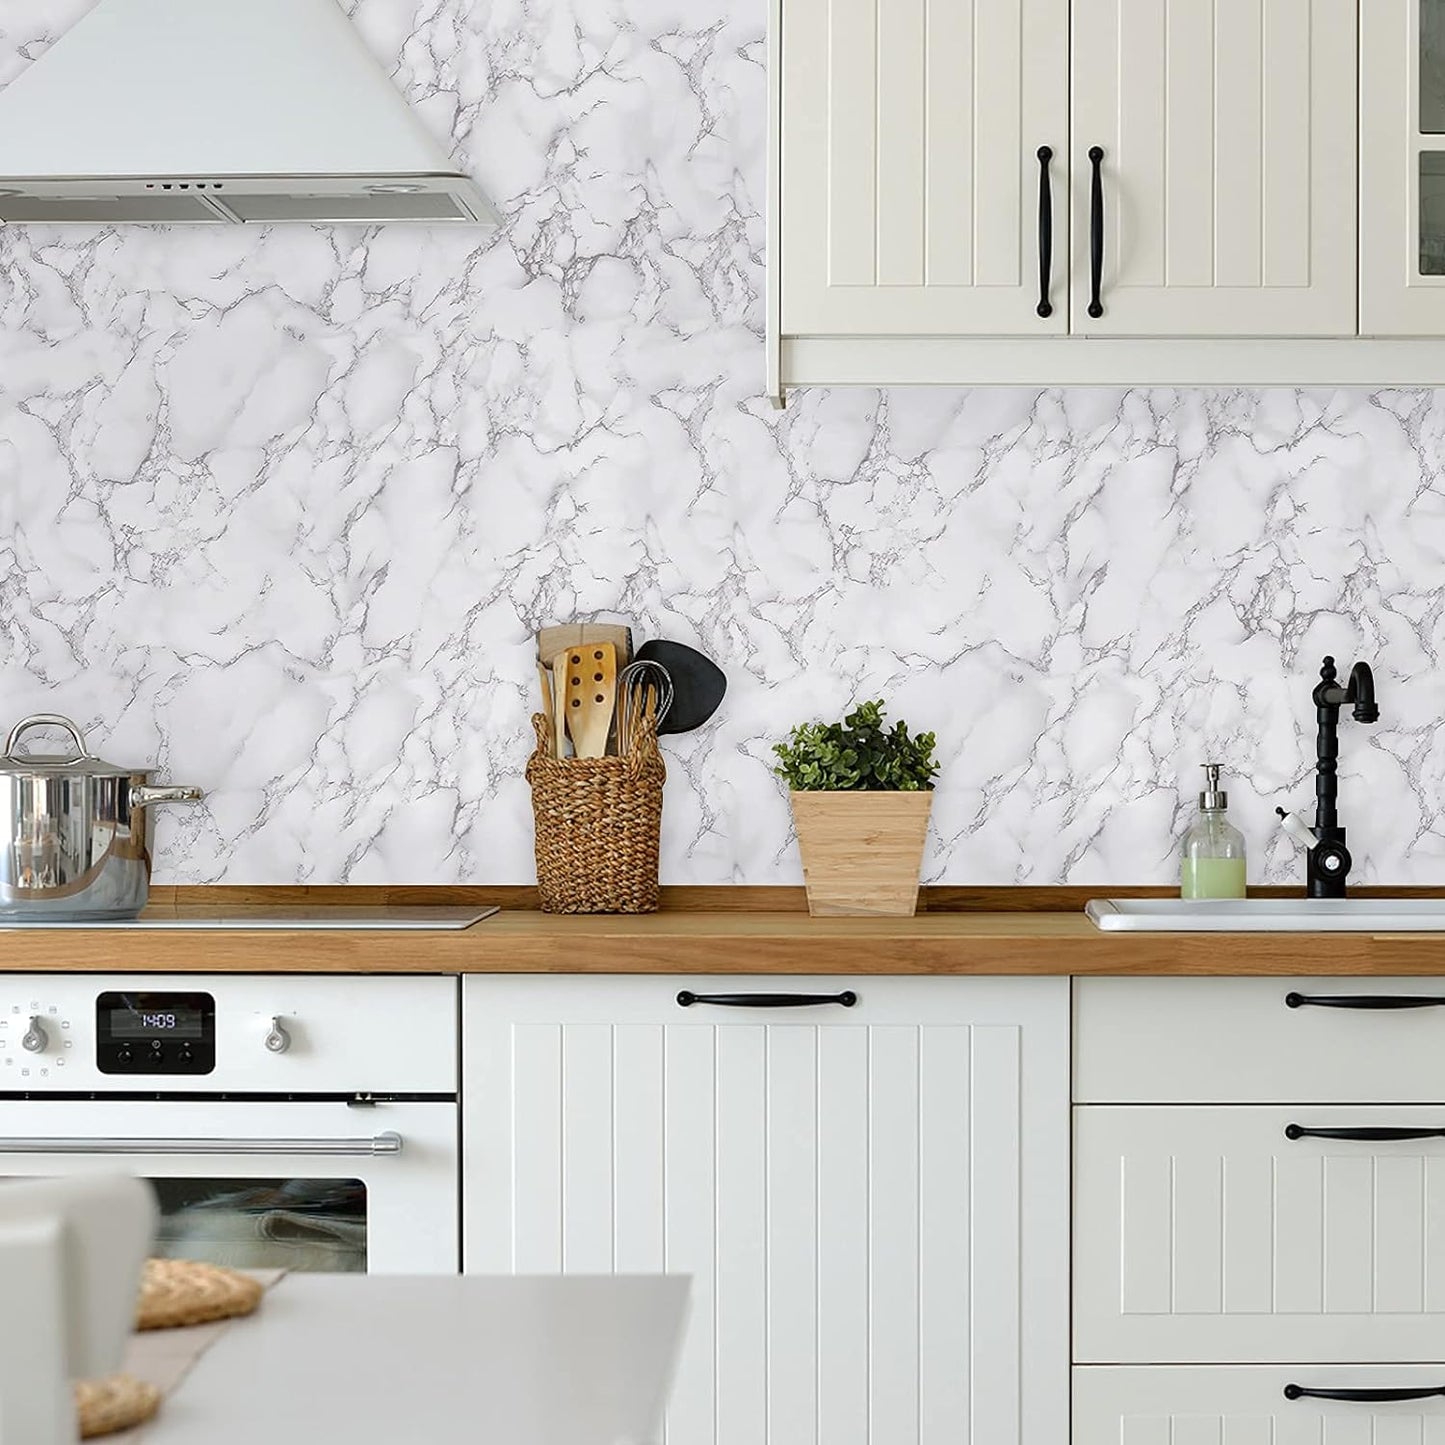 Caltero Marble Contact Paper 15.7" x 118" White Grey Wallpaper Peel and Stick Glossy Marble Self Adhesive Contact Paper for Countertop Kitchen Cabinets Bathroom